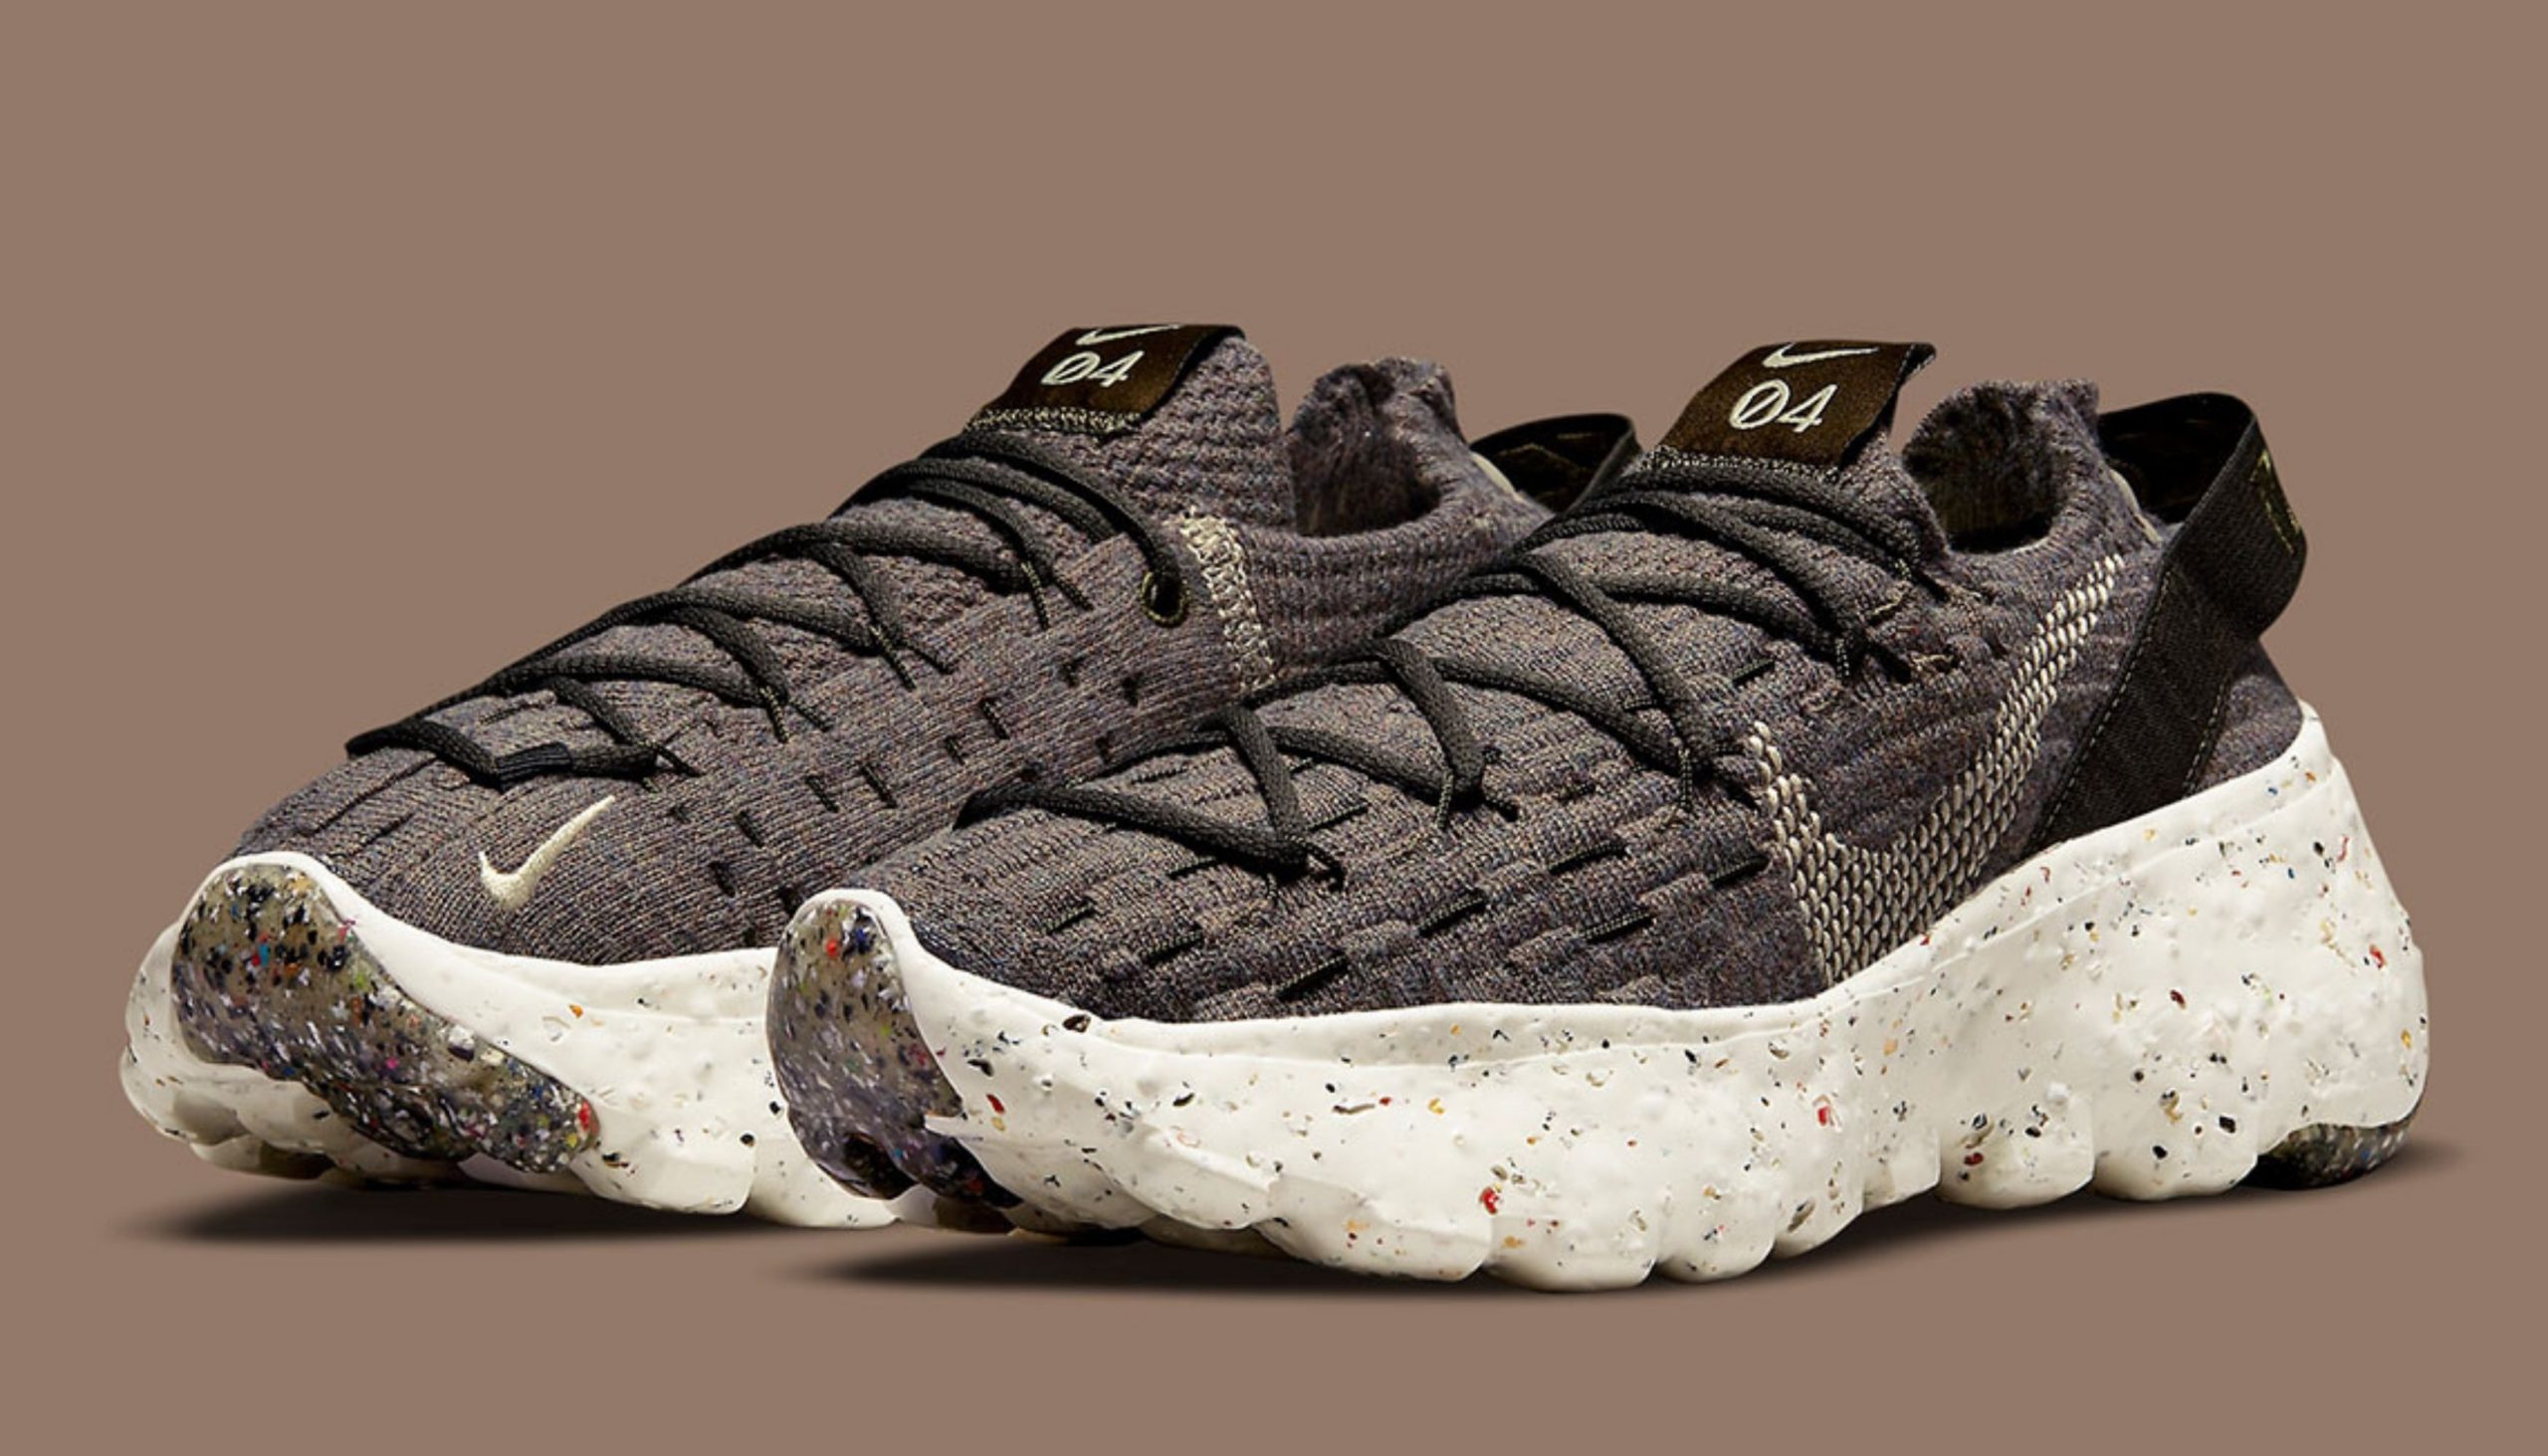 The new Nike Space Hippie 04 Mocha: one for the Gen Z "Zoomers"?